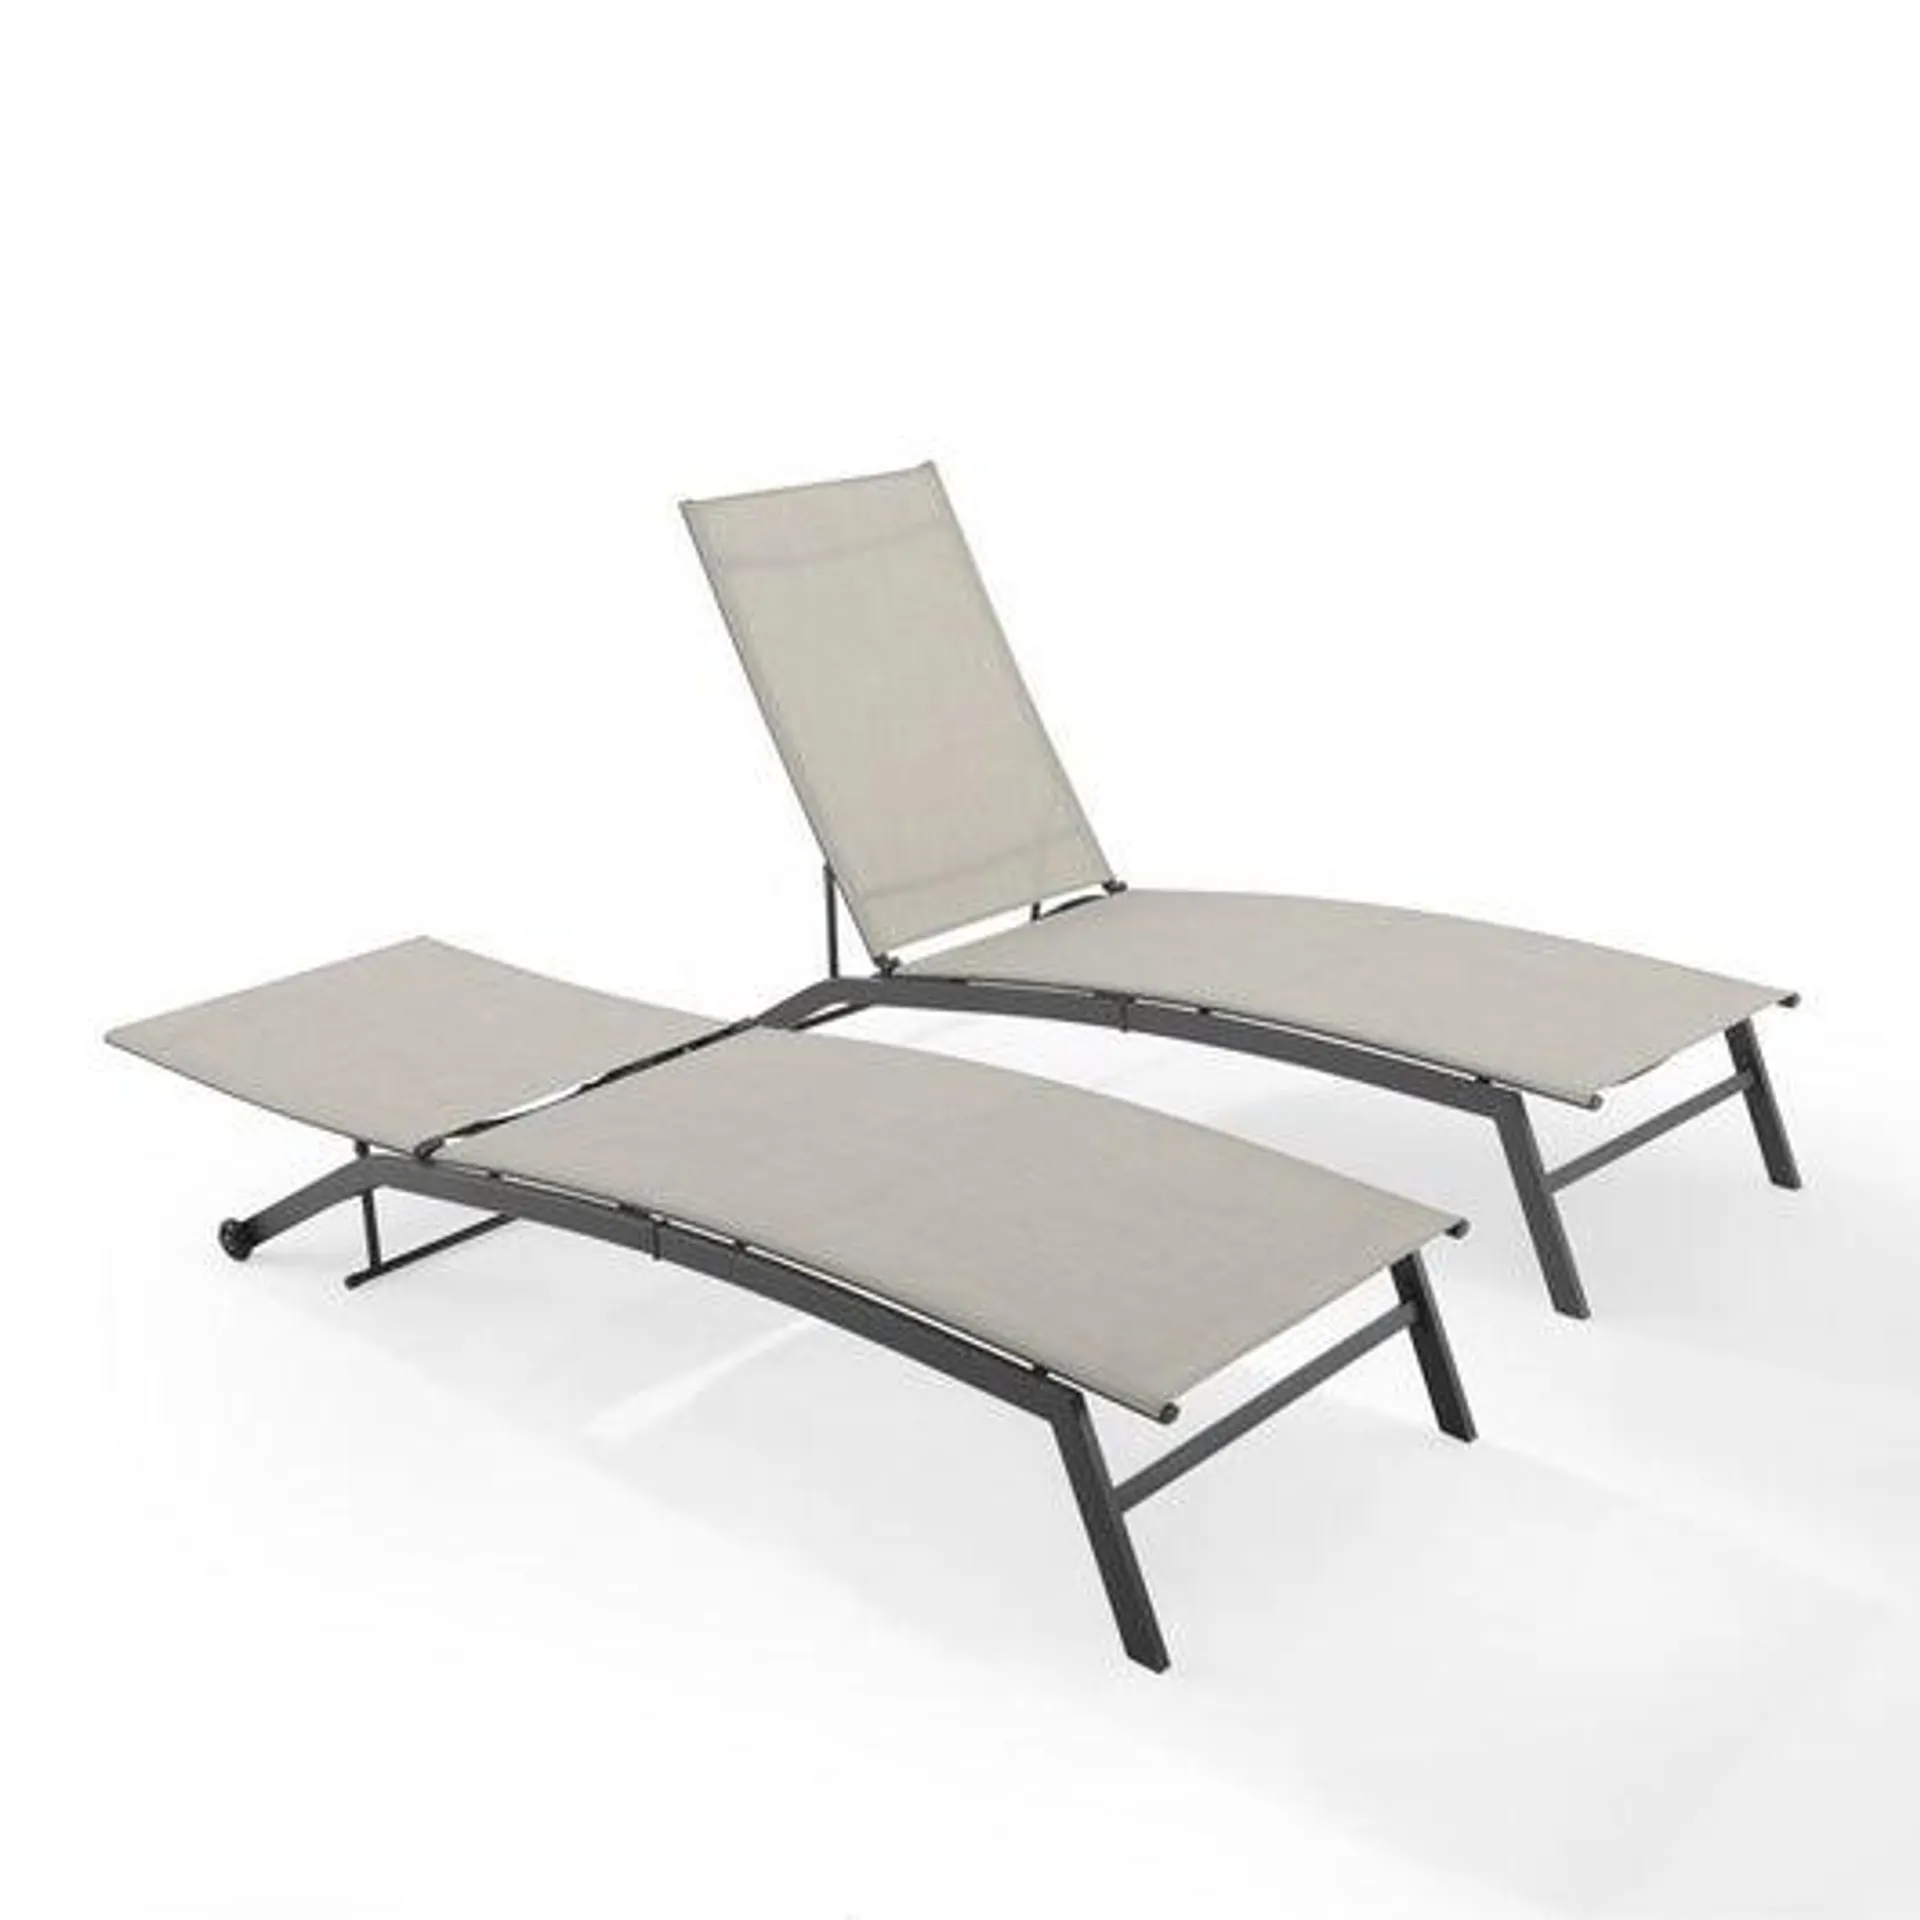 Weaver 2pc Outdoor Chaise Lounge Set